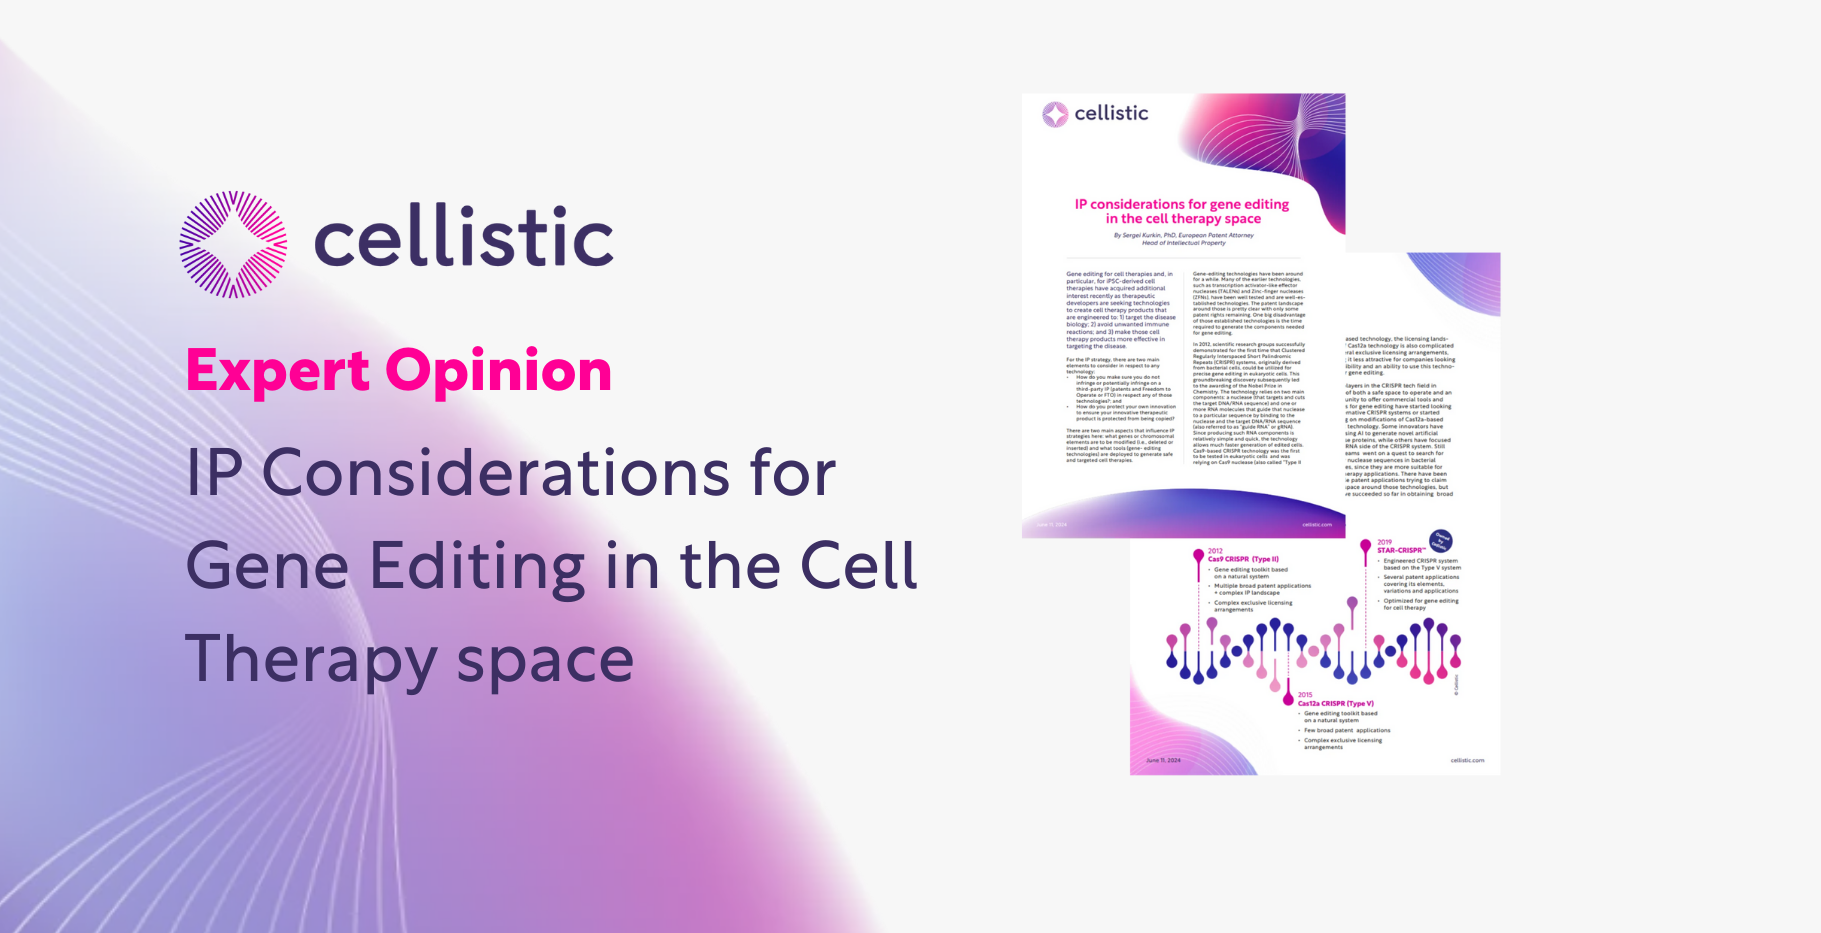 IP Considerations for Gene Editing in the Cell Therapy space